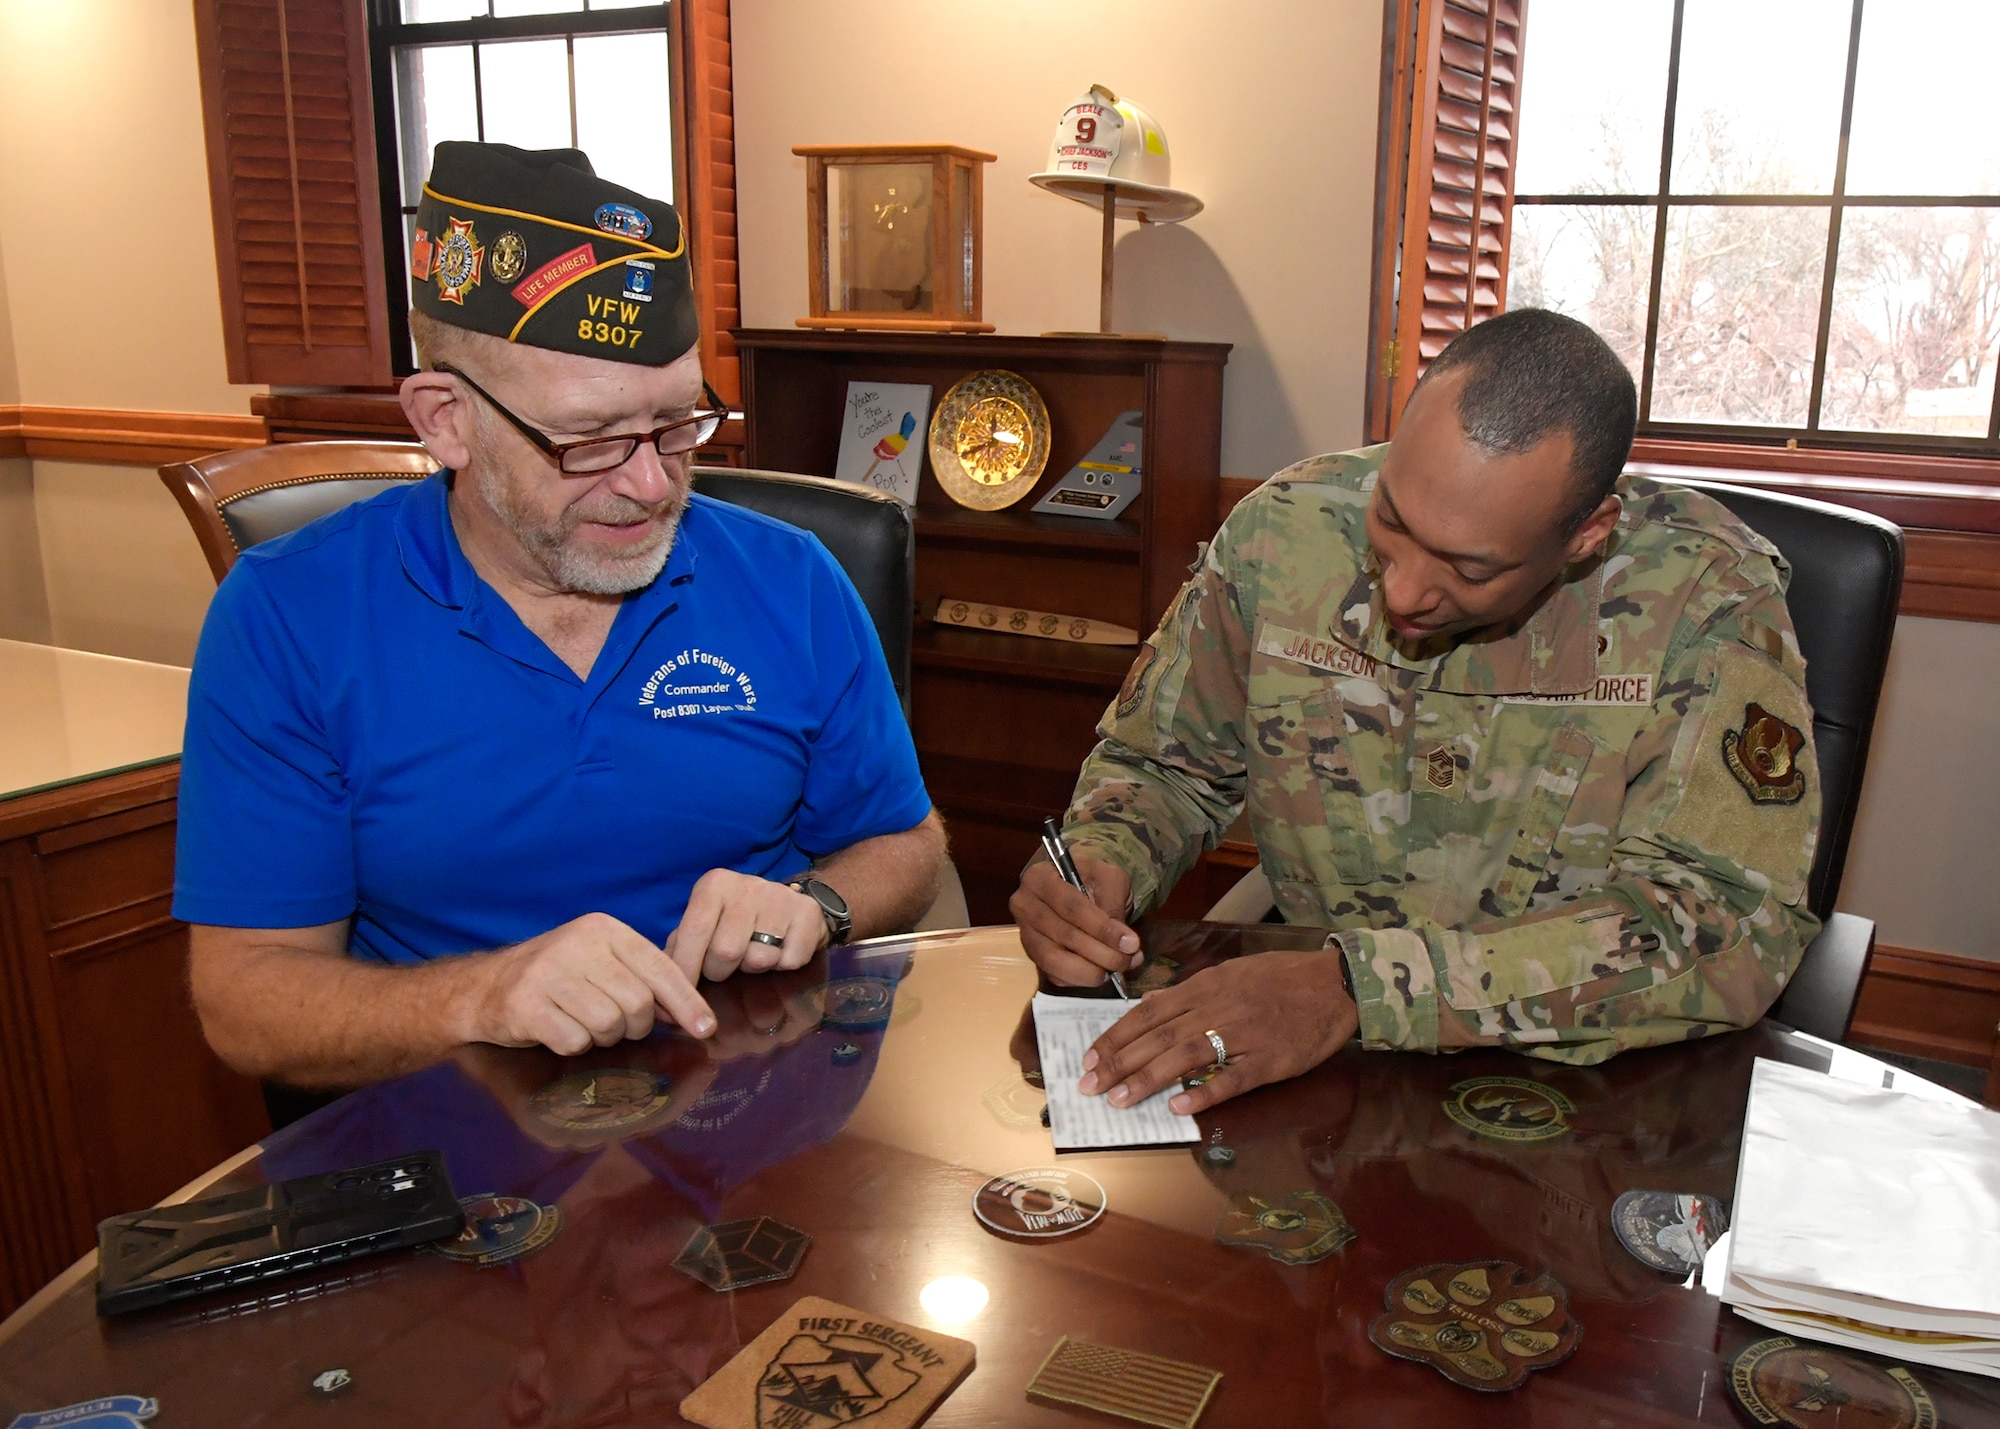 (Left to right) Rich Ludwich, Veterans of Foreign Wars Post 8307 commander, registers Chief Master Sgt. Vernon Jackson, 75th Air Base Wing command chief, with the VFW, Feb. 21 at Hill Air Force Base, Utah. The VFW, a veteran’s support organization, is partnering with the base and has adopted Operation Warm Heart, a private organization that supports the installation's Airmen, Guardians and their families. (U.S. Air Force photo by Todd Cromar)